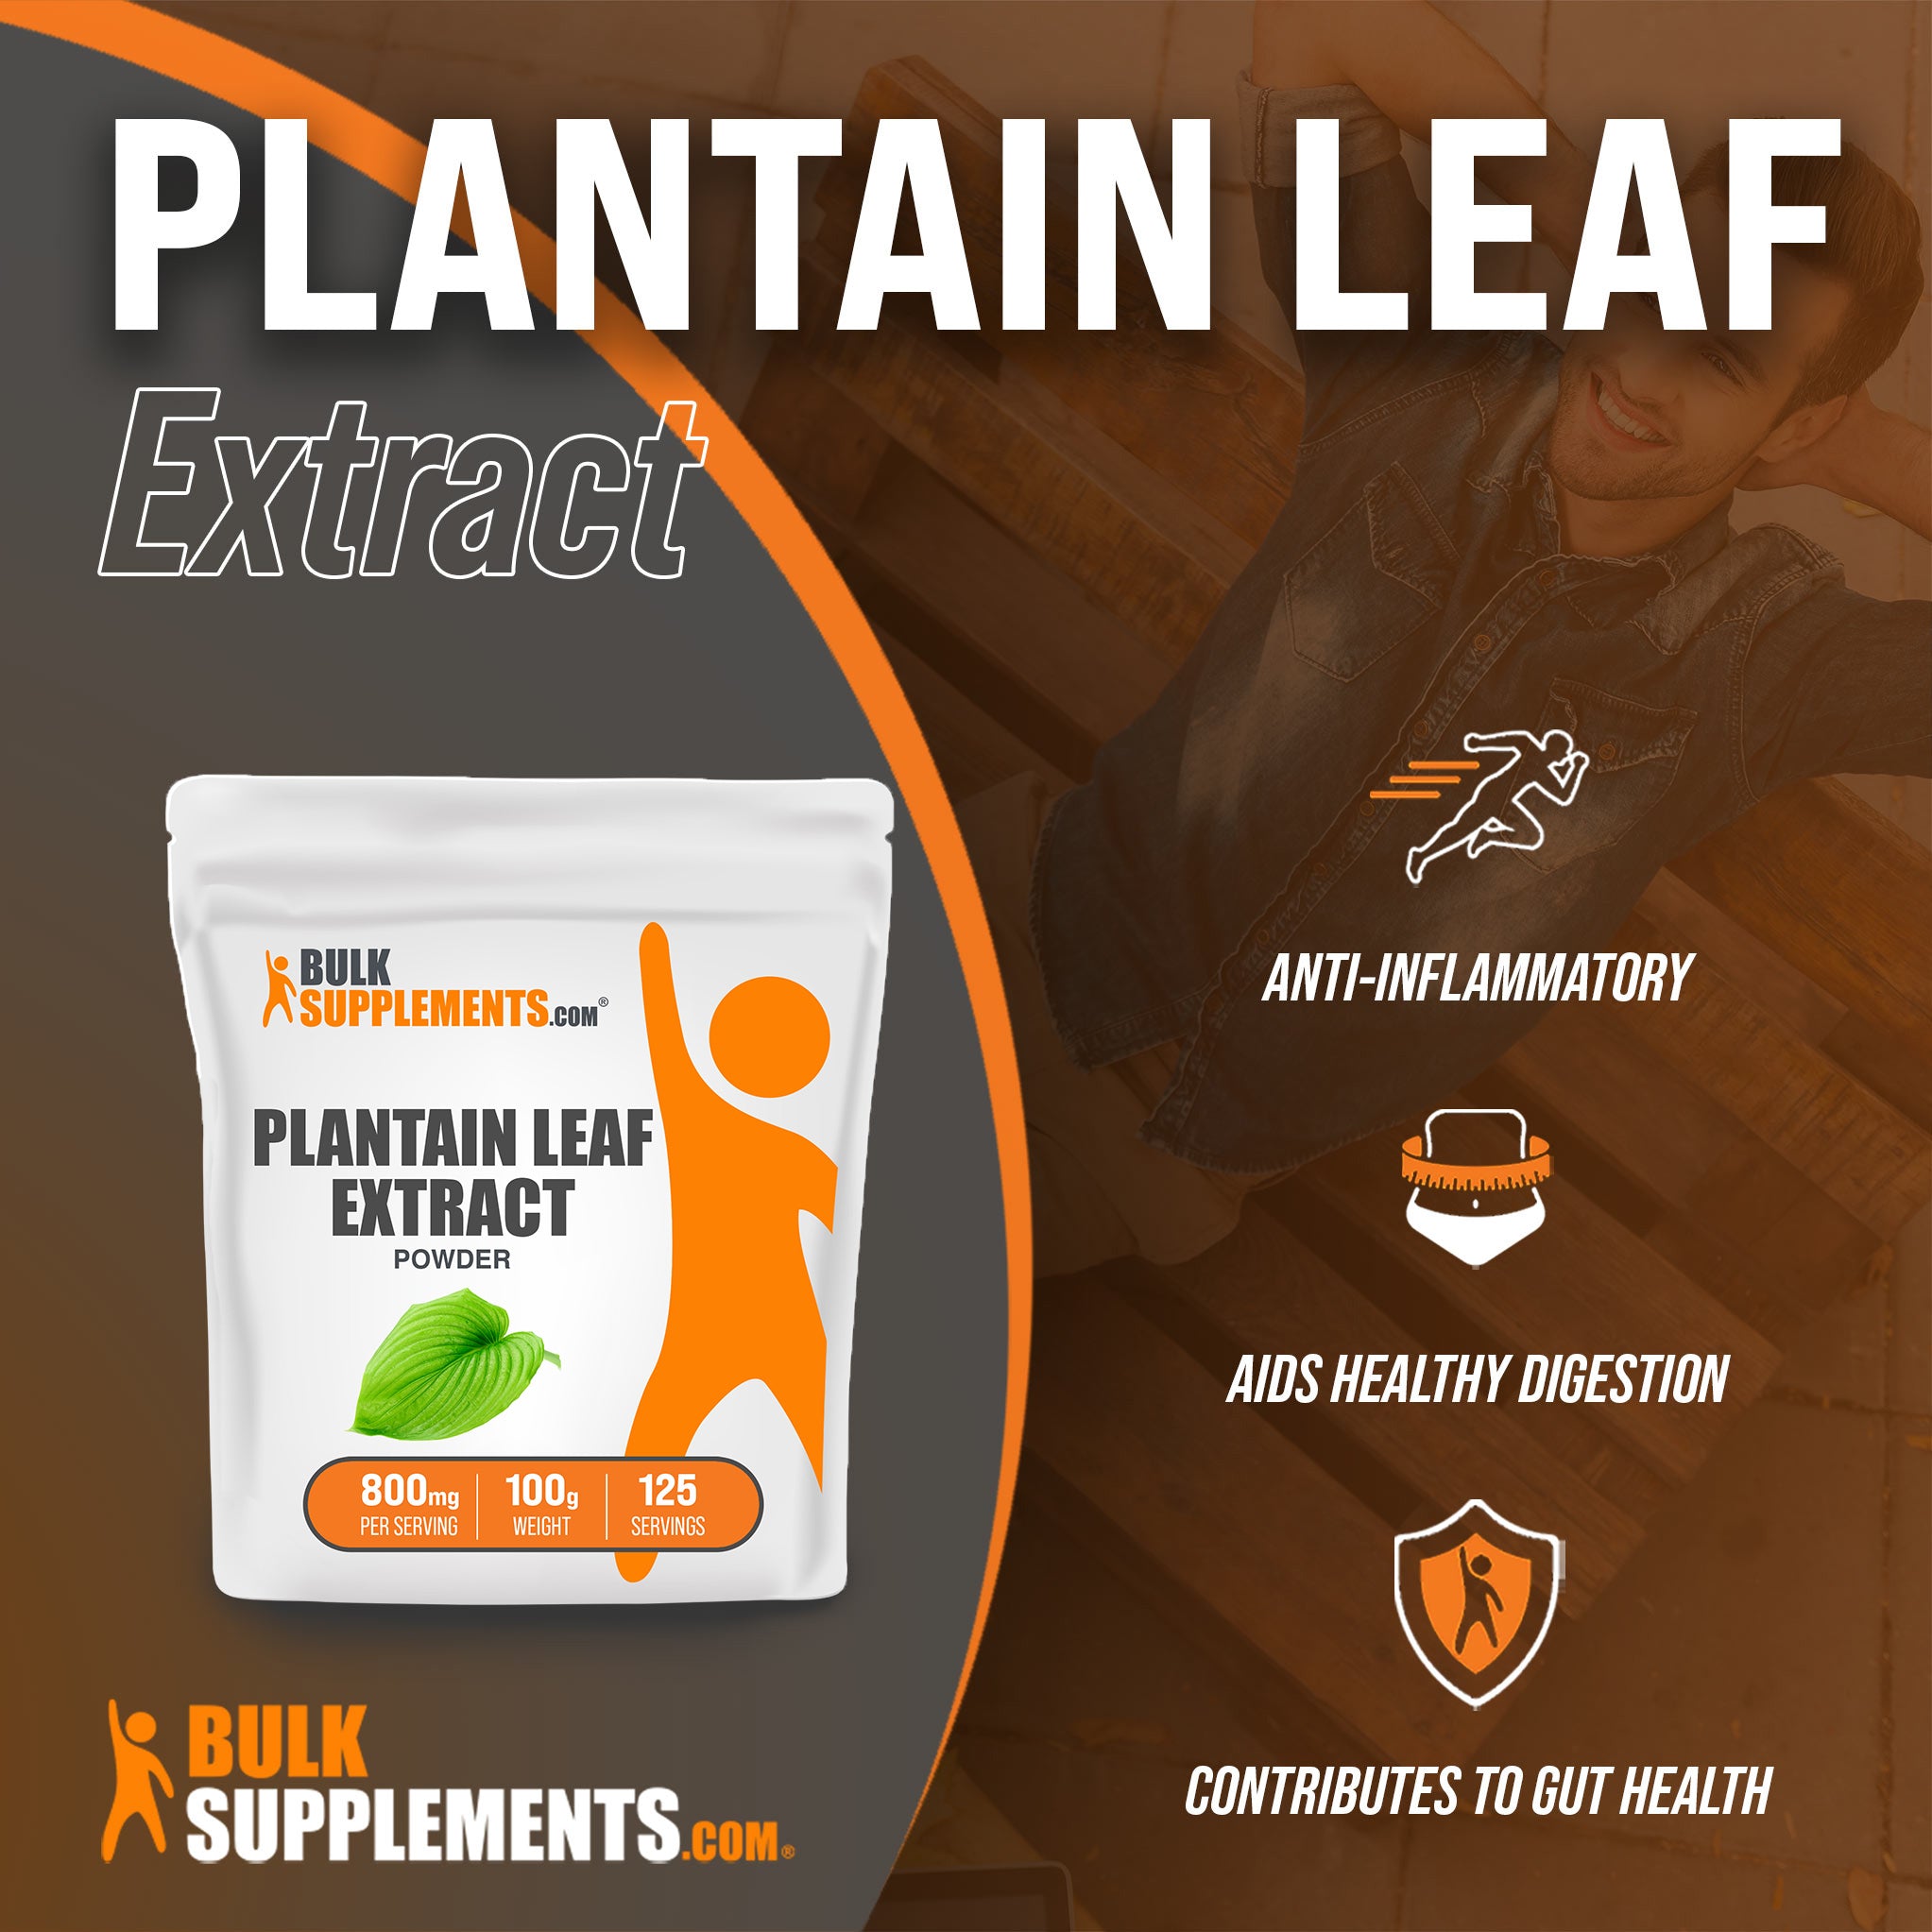 Benefits of Plantain Leaf Extract: anti-inflammatory, aids healthy digestion, contributes to gut health